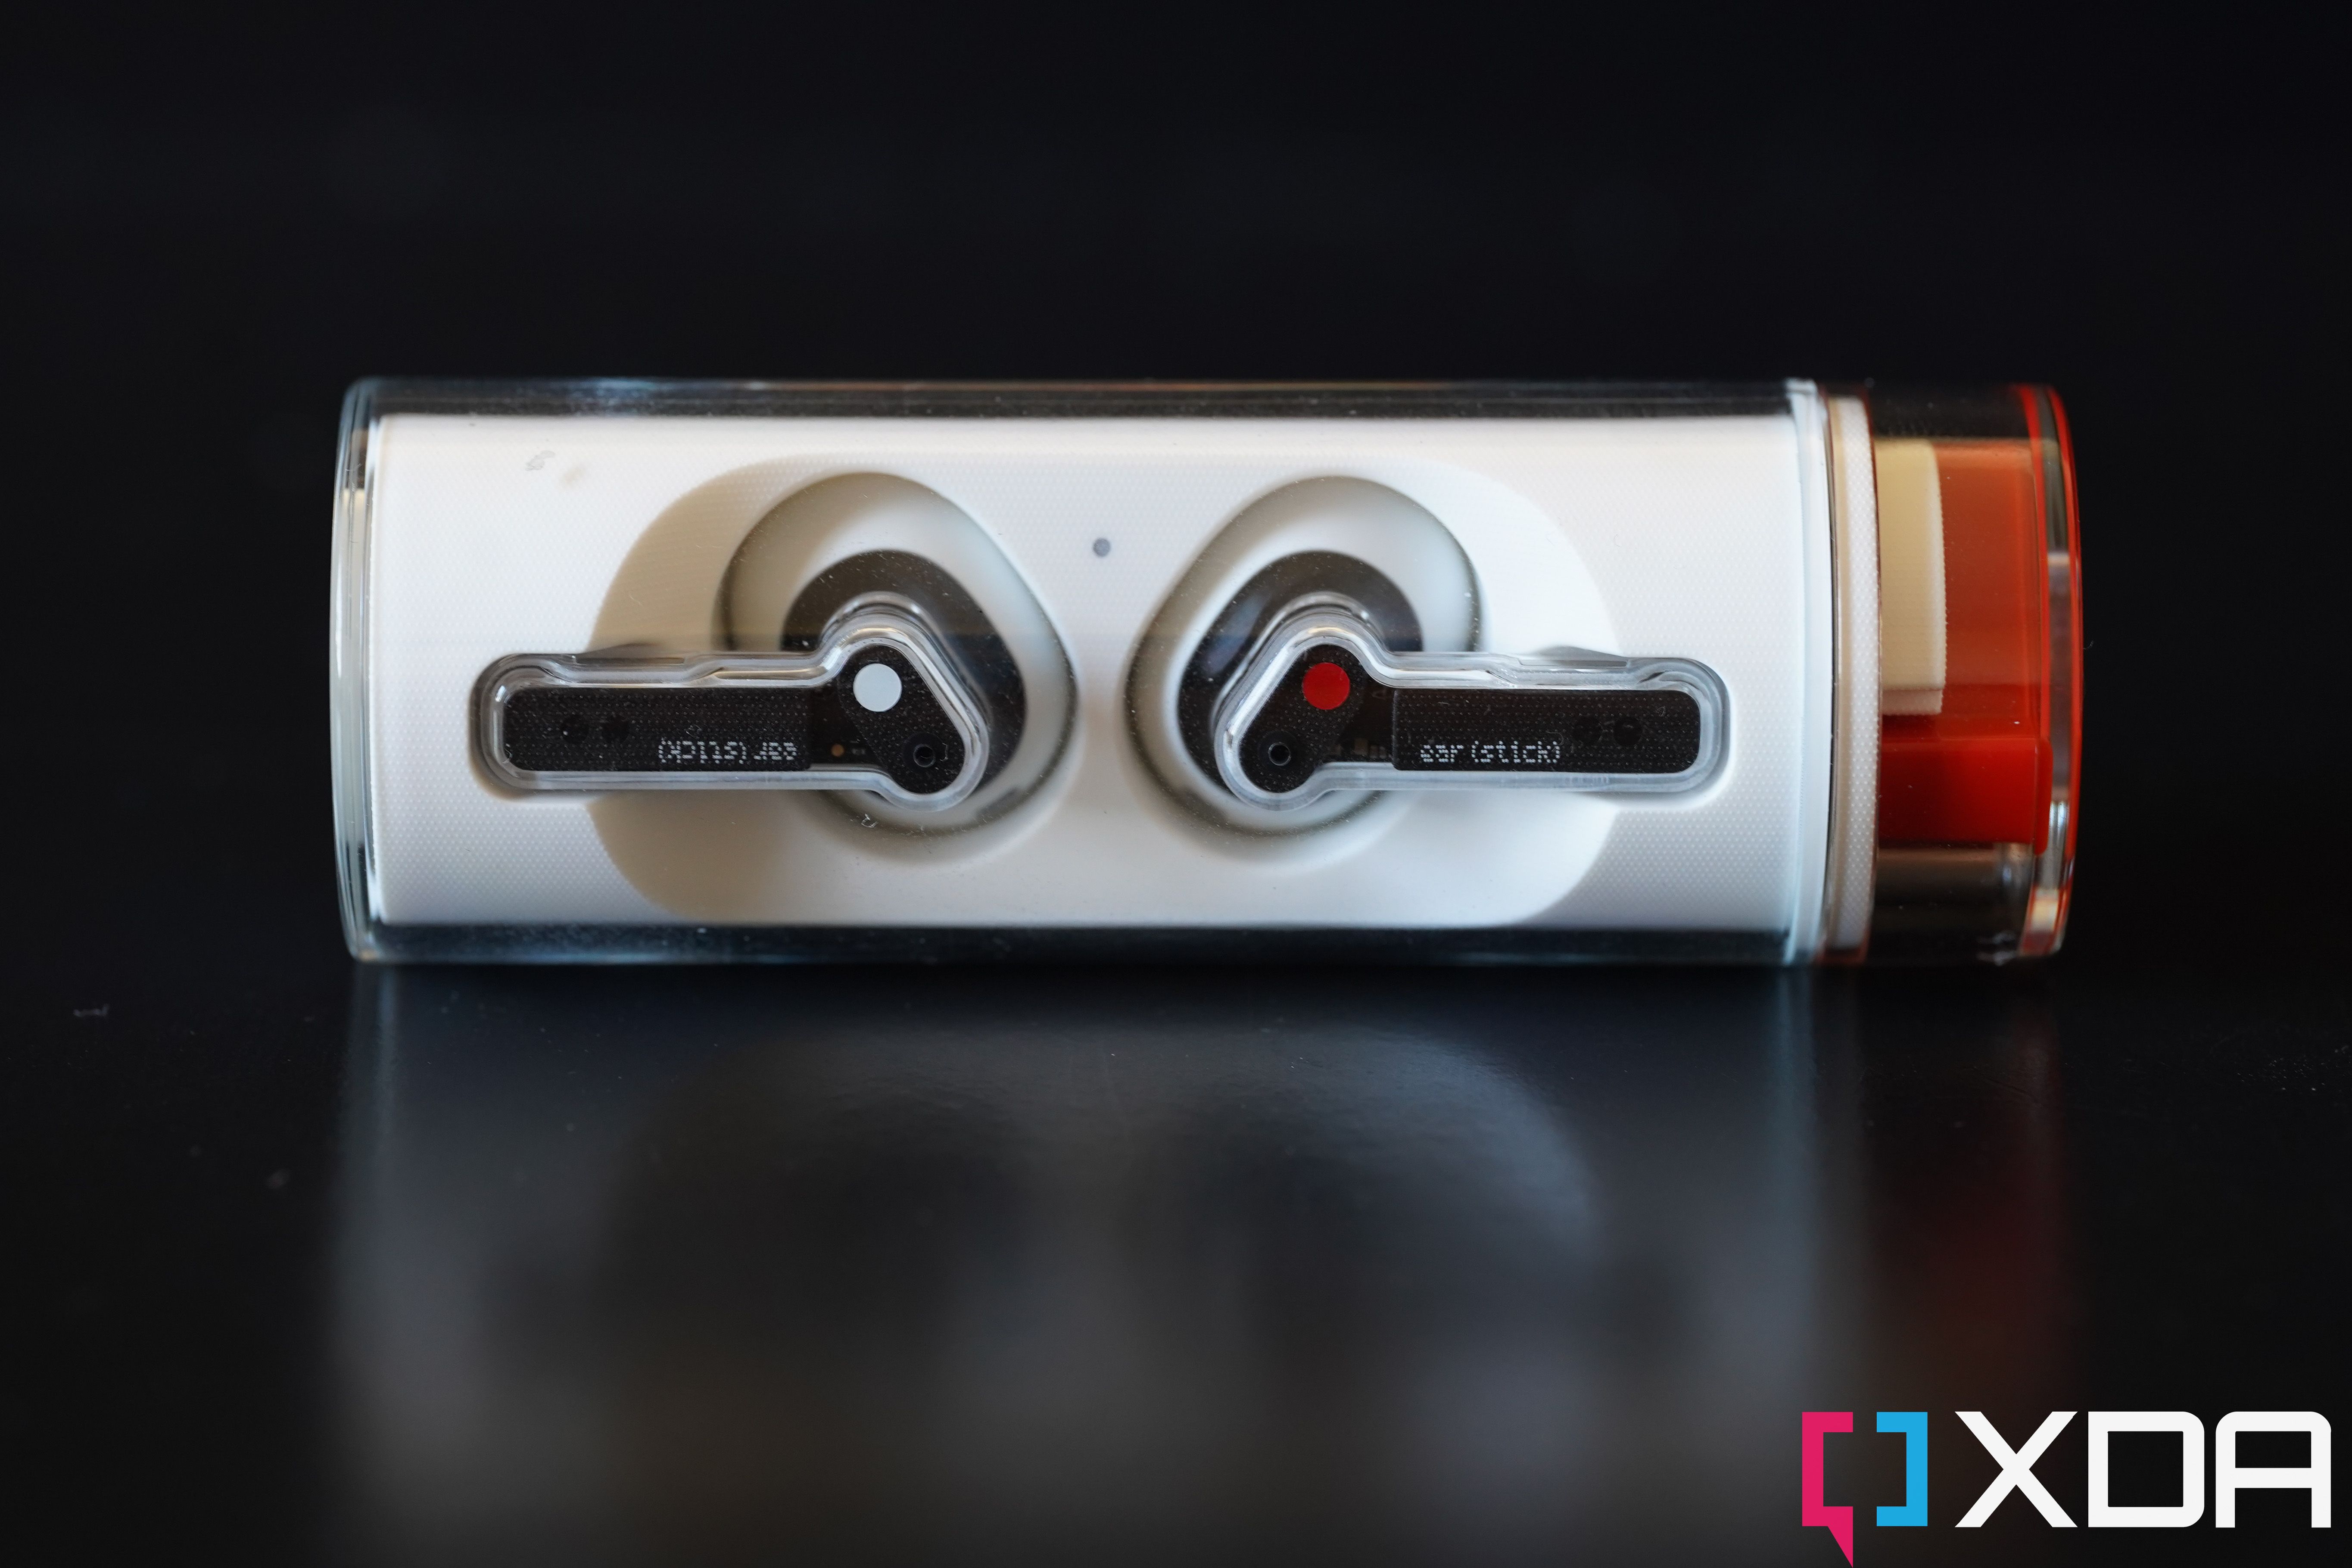 Nothing Ear Stick review: quite something sonically